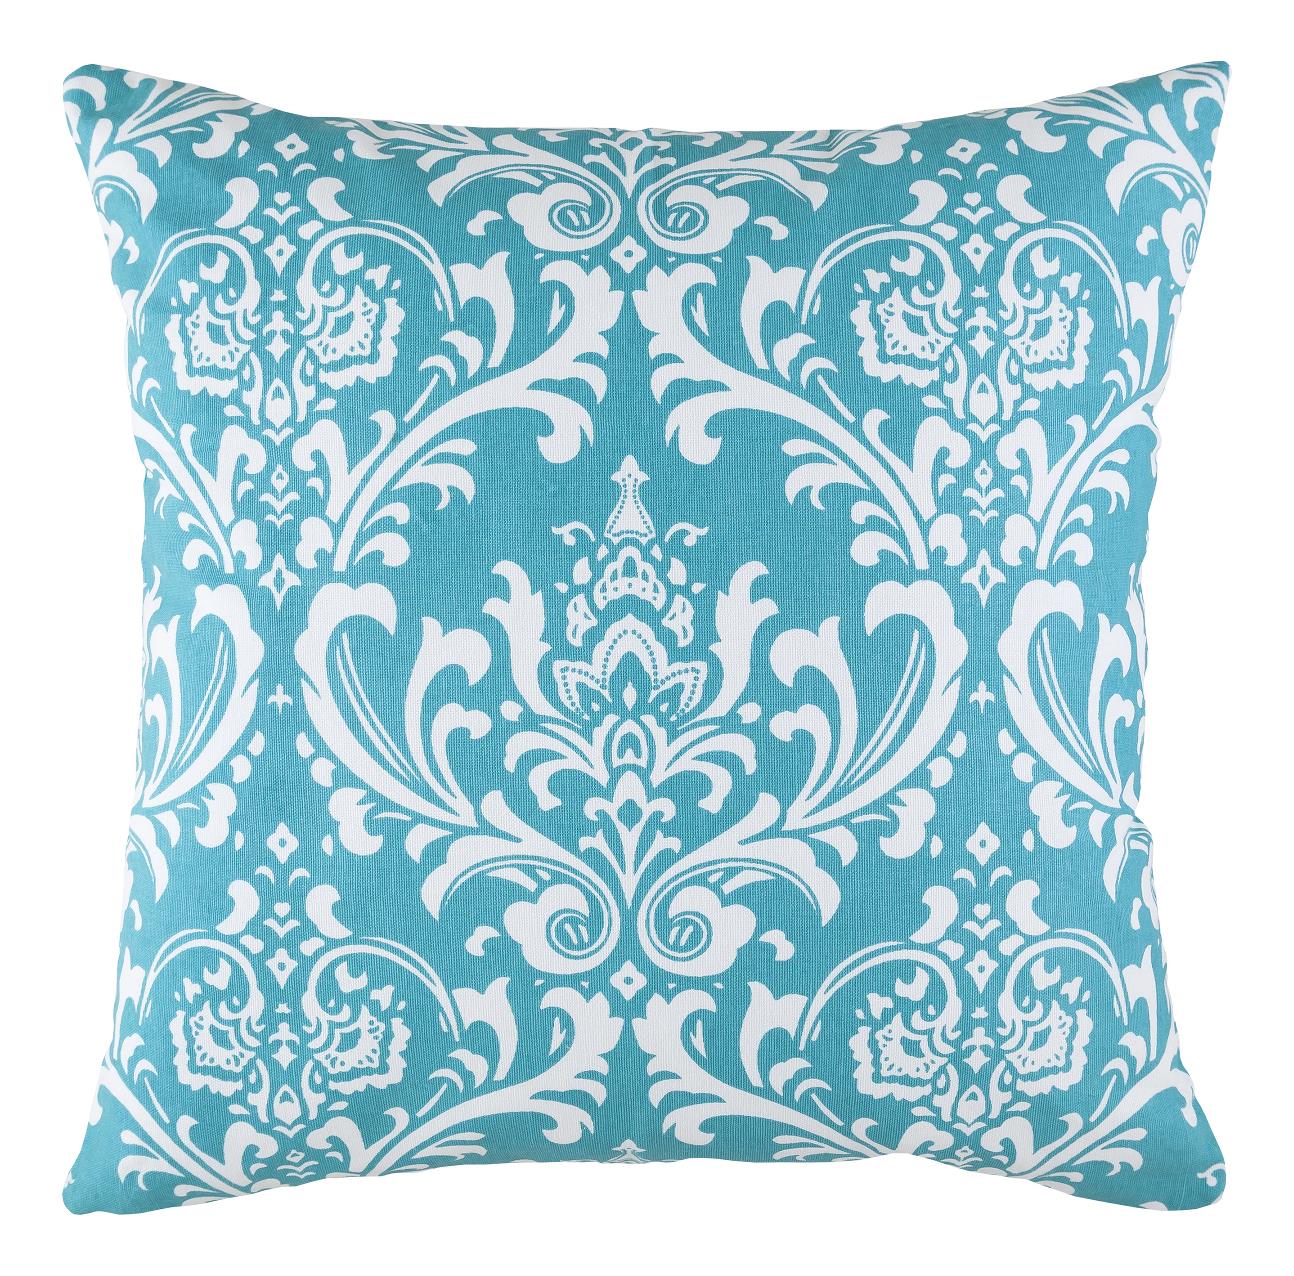 Damask Accent Decorative Throw Pillow Covers (Pack of 2) - TreeWool#color_turquoise